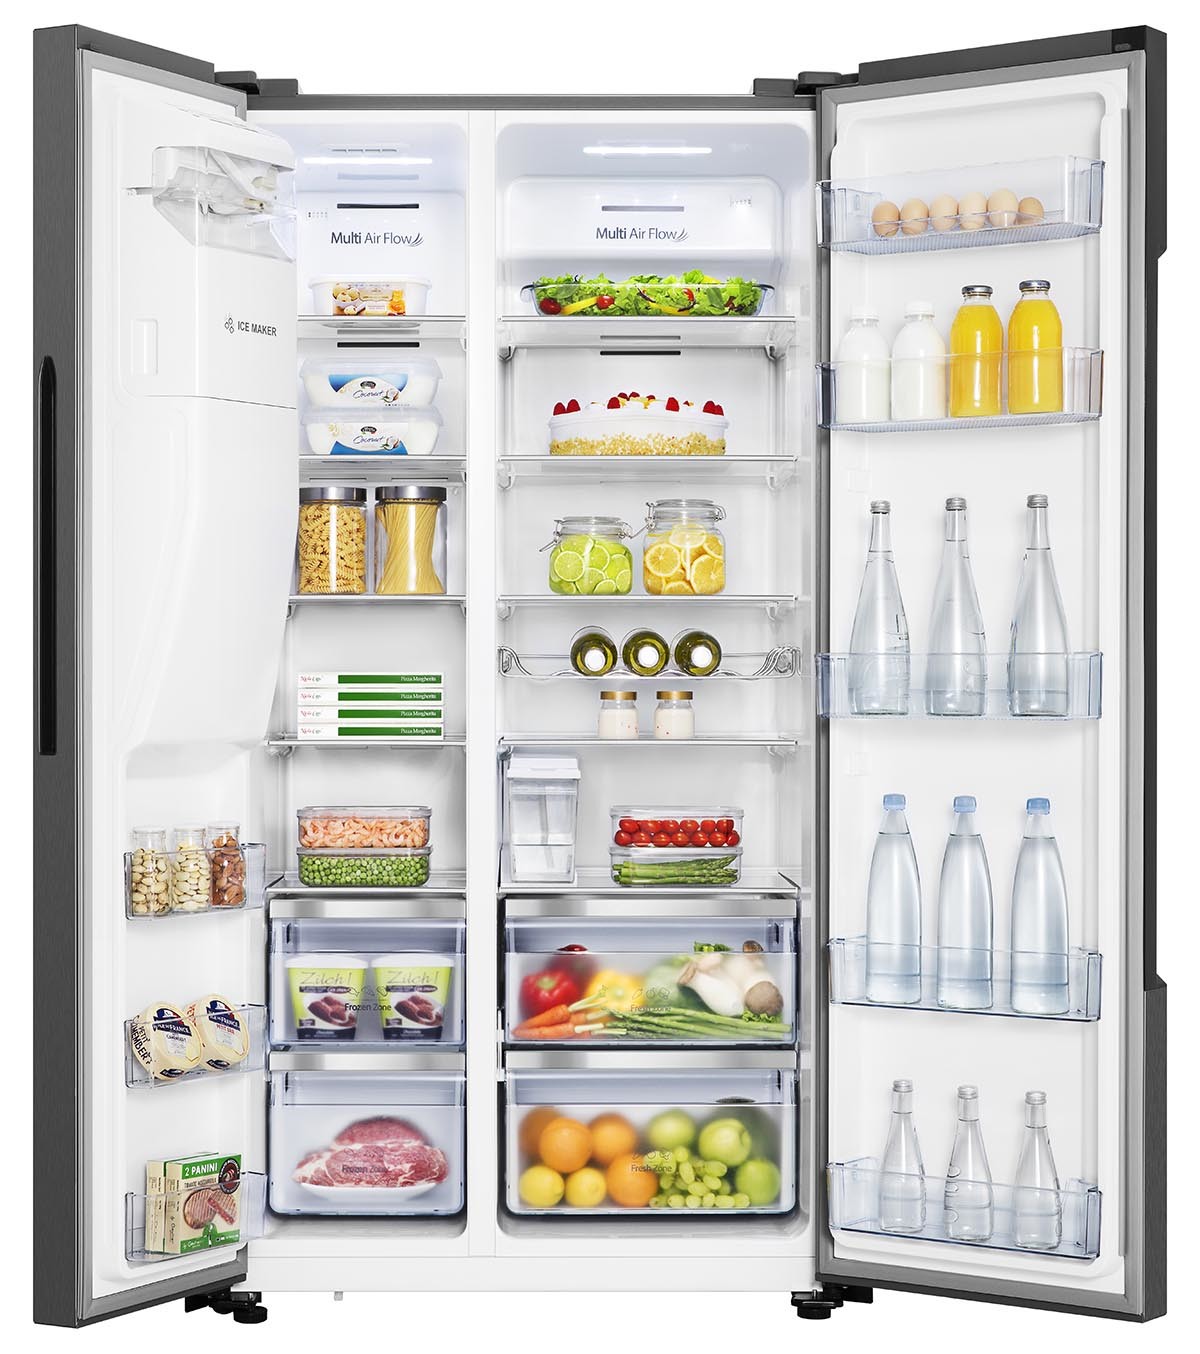 Five refrigerators connected to integrate the kitchen in the smart home